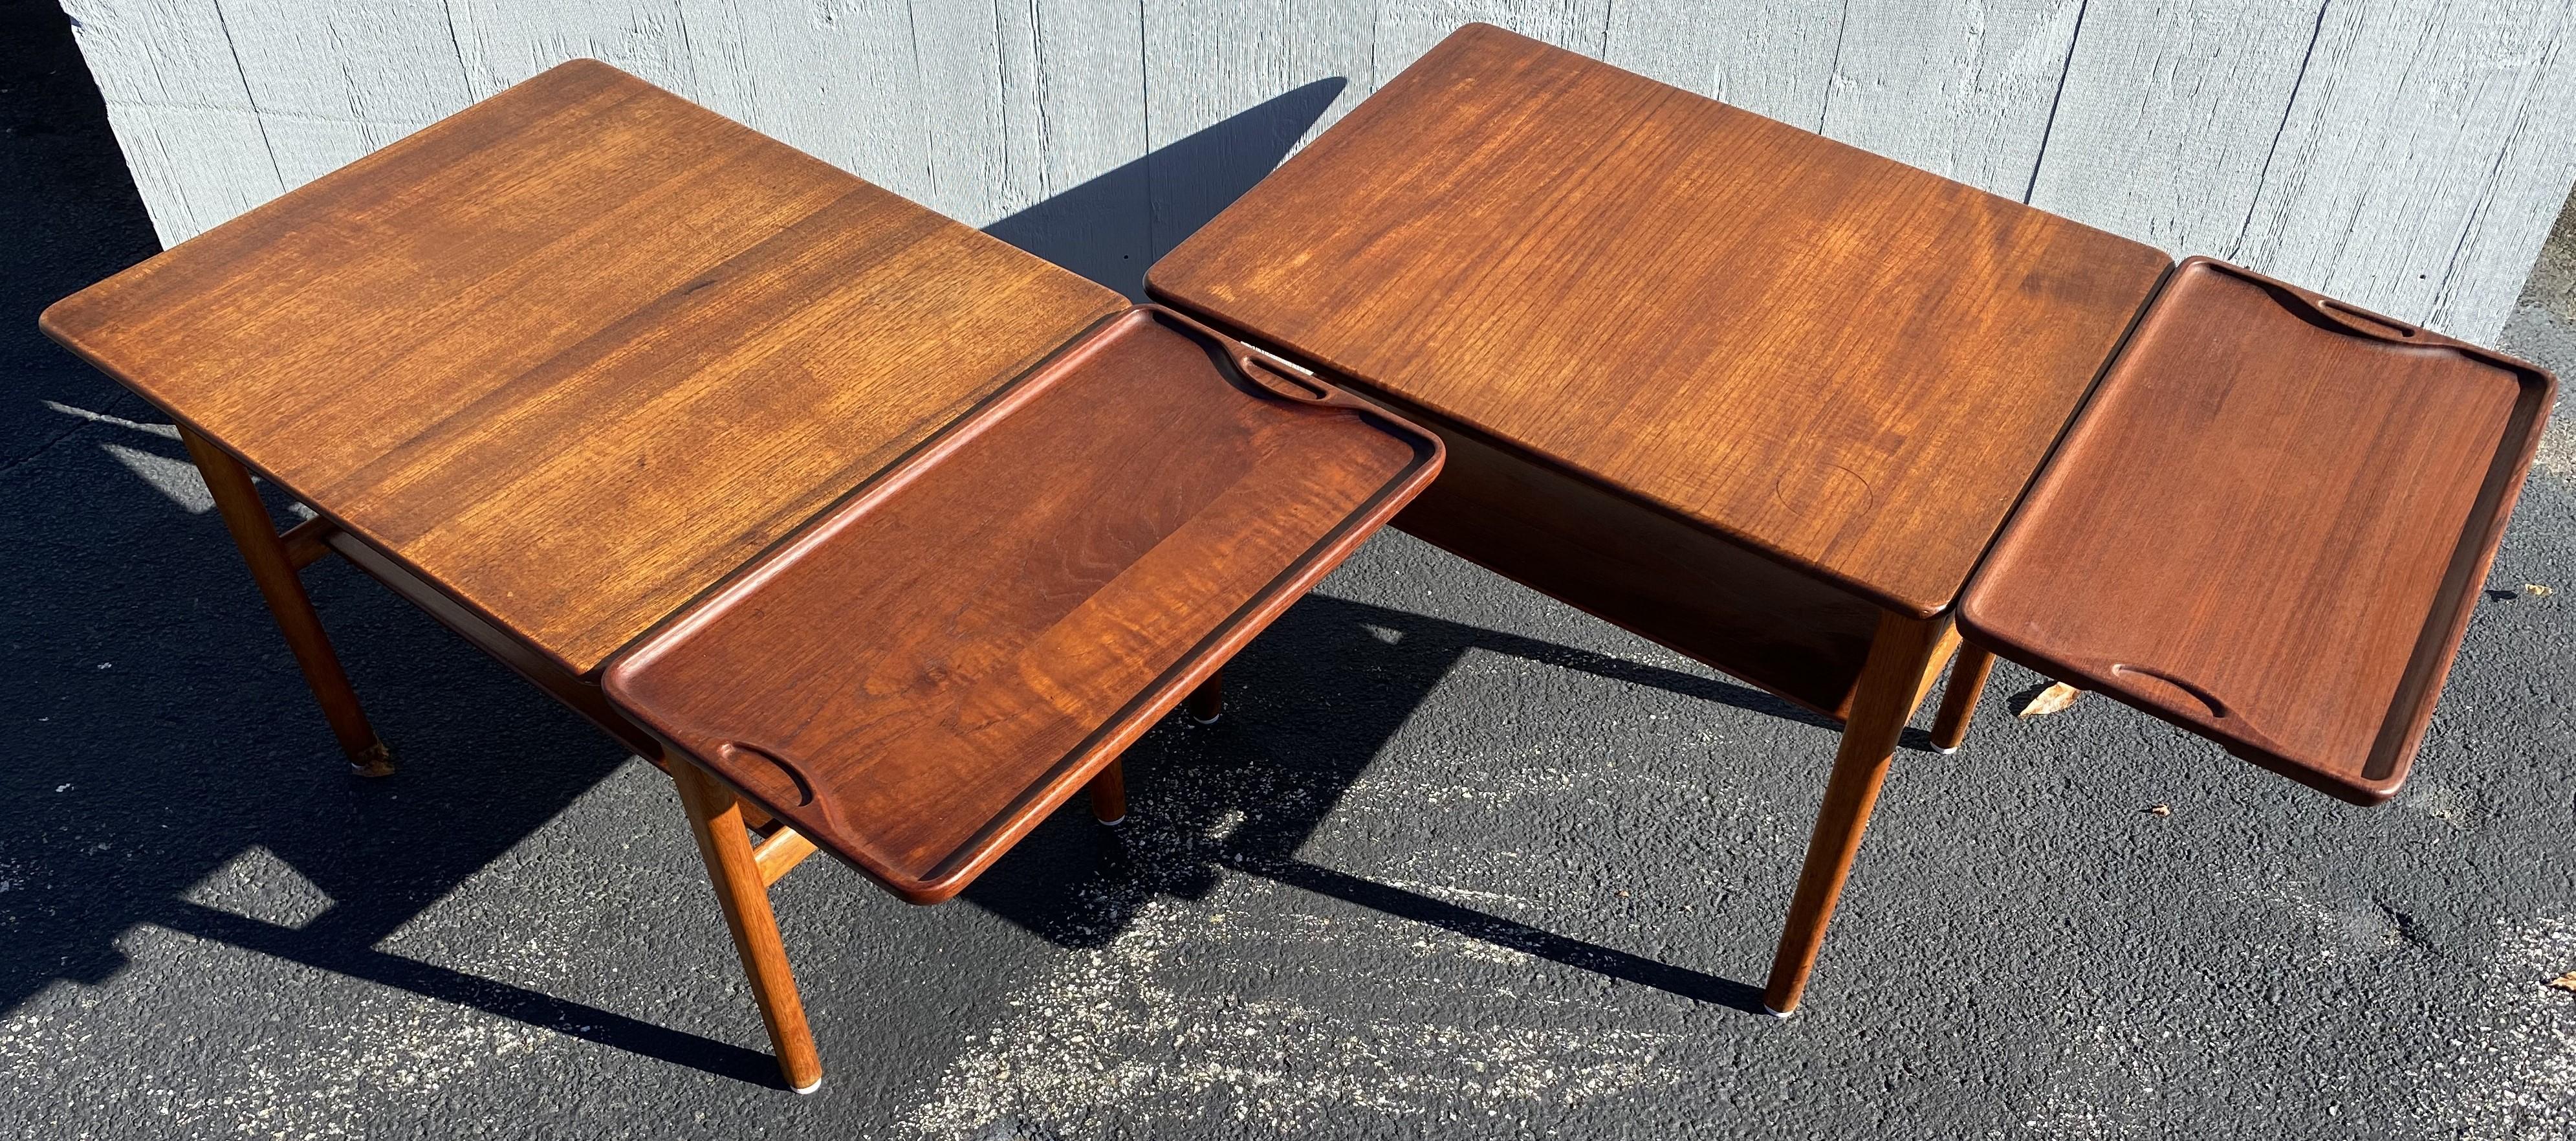 A fine pair of Mid Century modern rectangular teak tables with hidden slide-out trays designed by Hans Wegner and produced by Johannes Hansen, Copenhagen, Denmark, circa 1960. Each table has a slide out hidden shelf under the top with a removeable